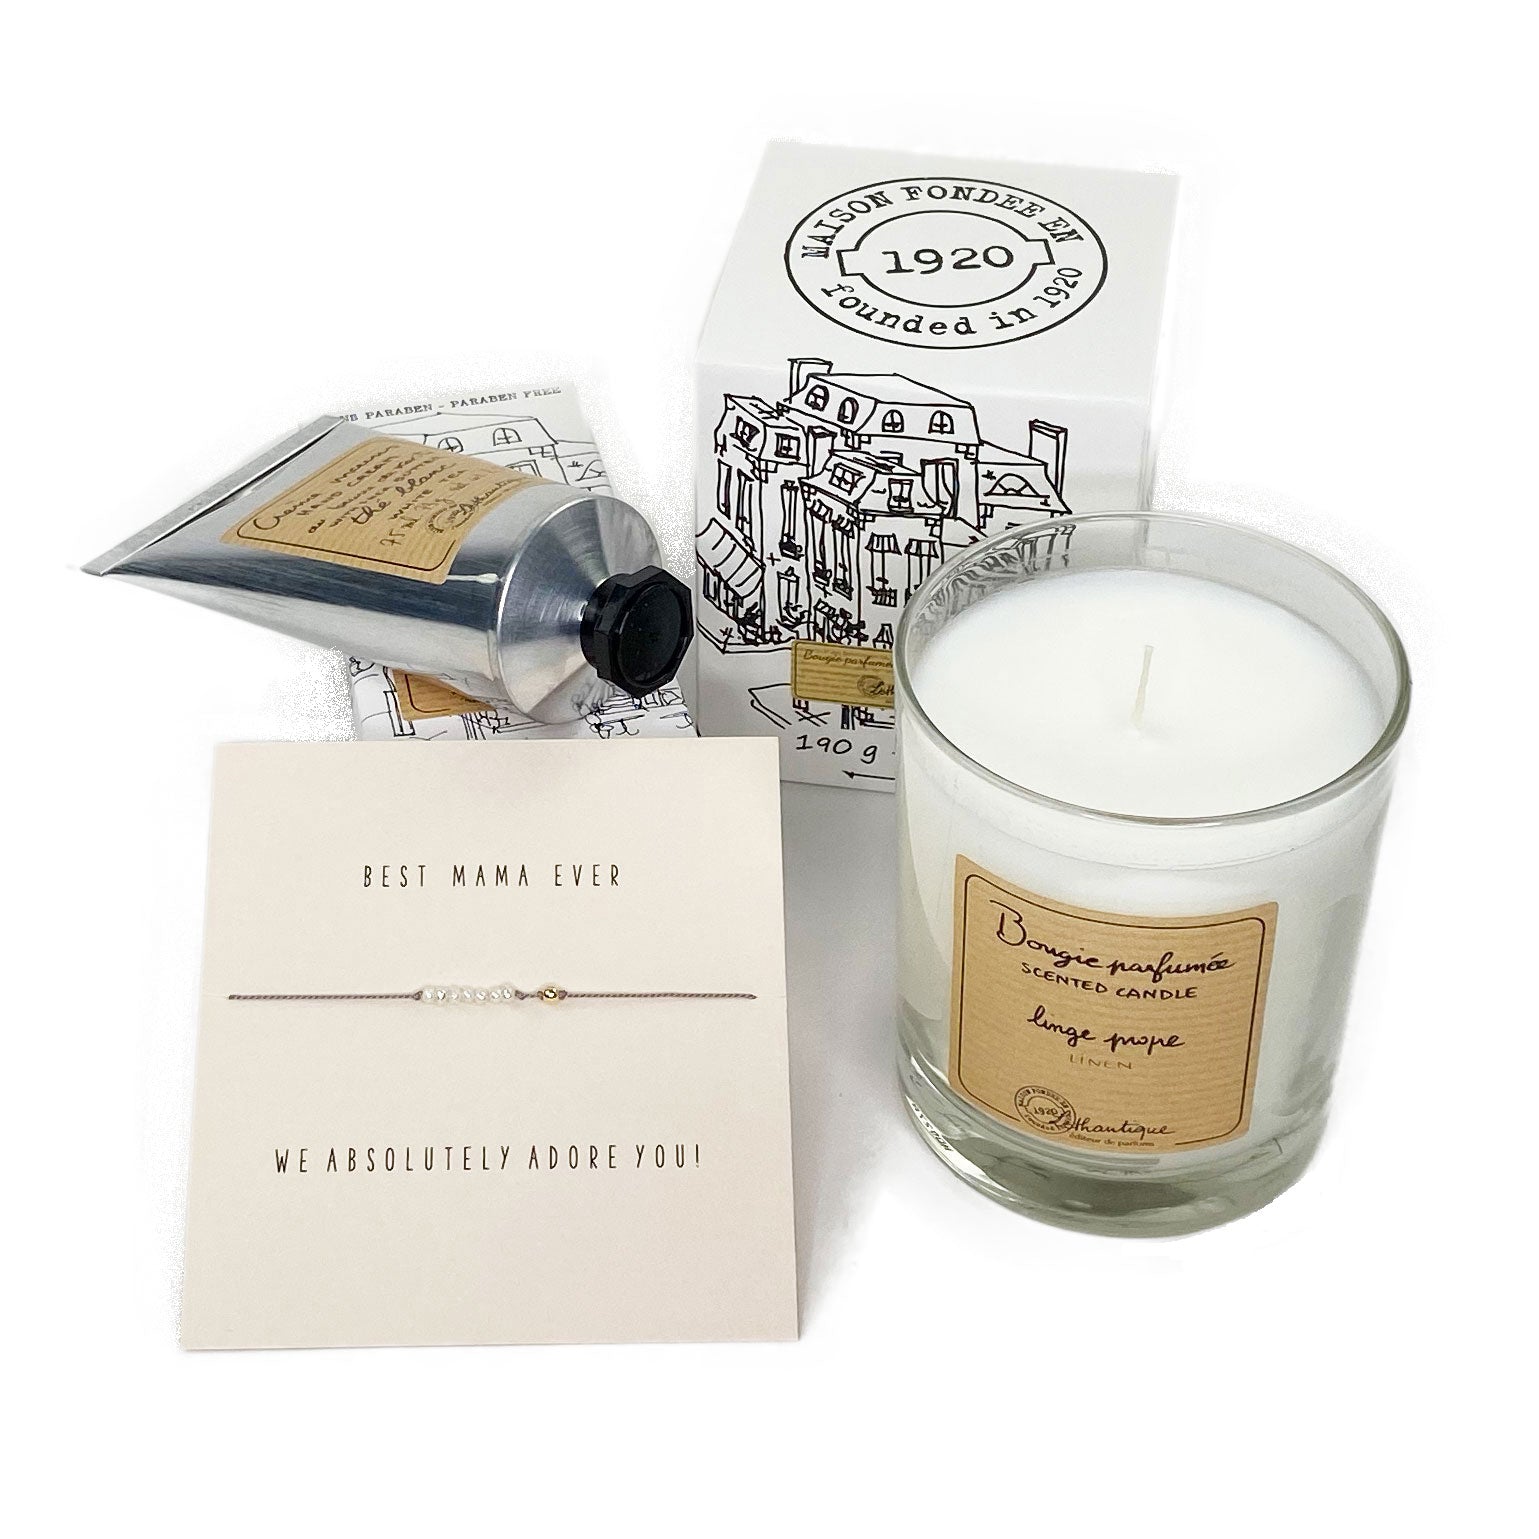 New Mom Gift at Bonjour Baby Baskets featuring a candle, hand cream and a bracelet